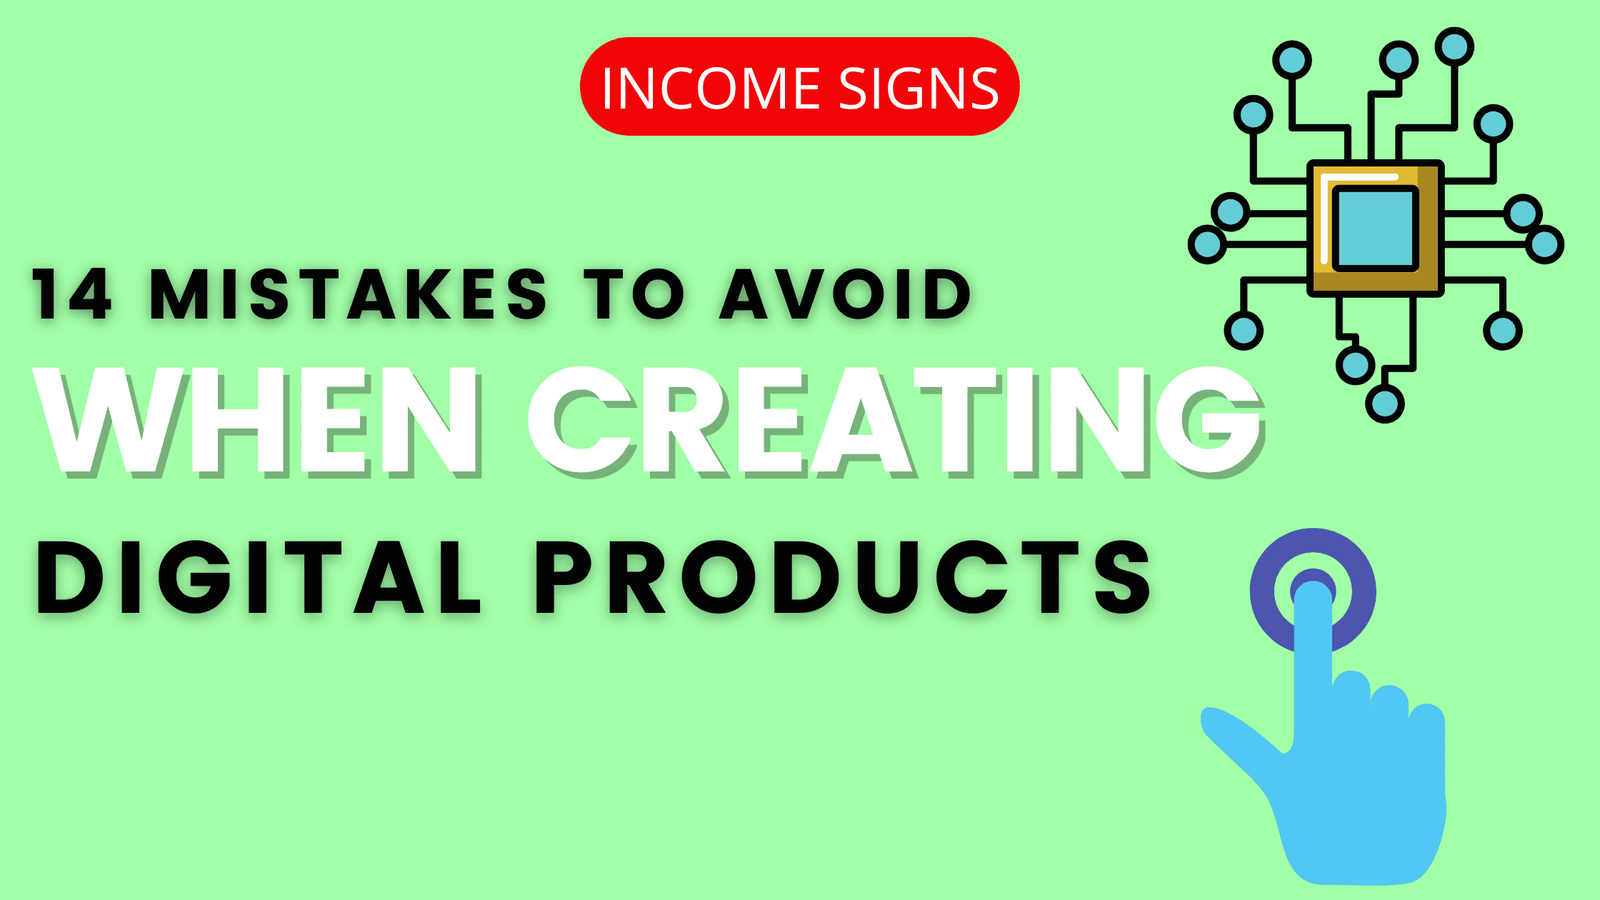 Mistakes to Avoid When Creating a Digital Product